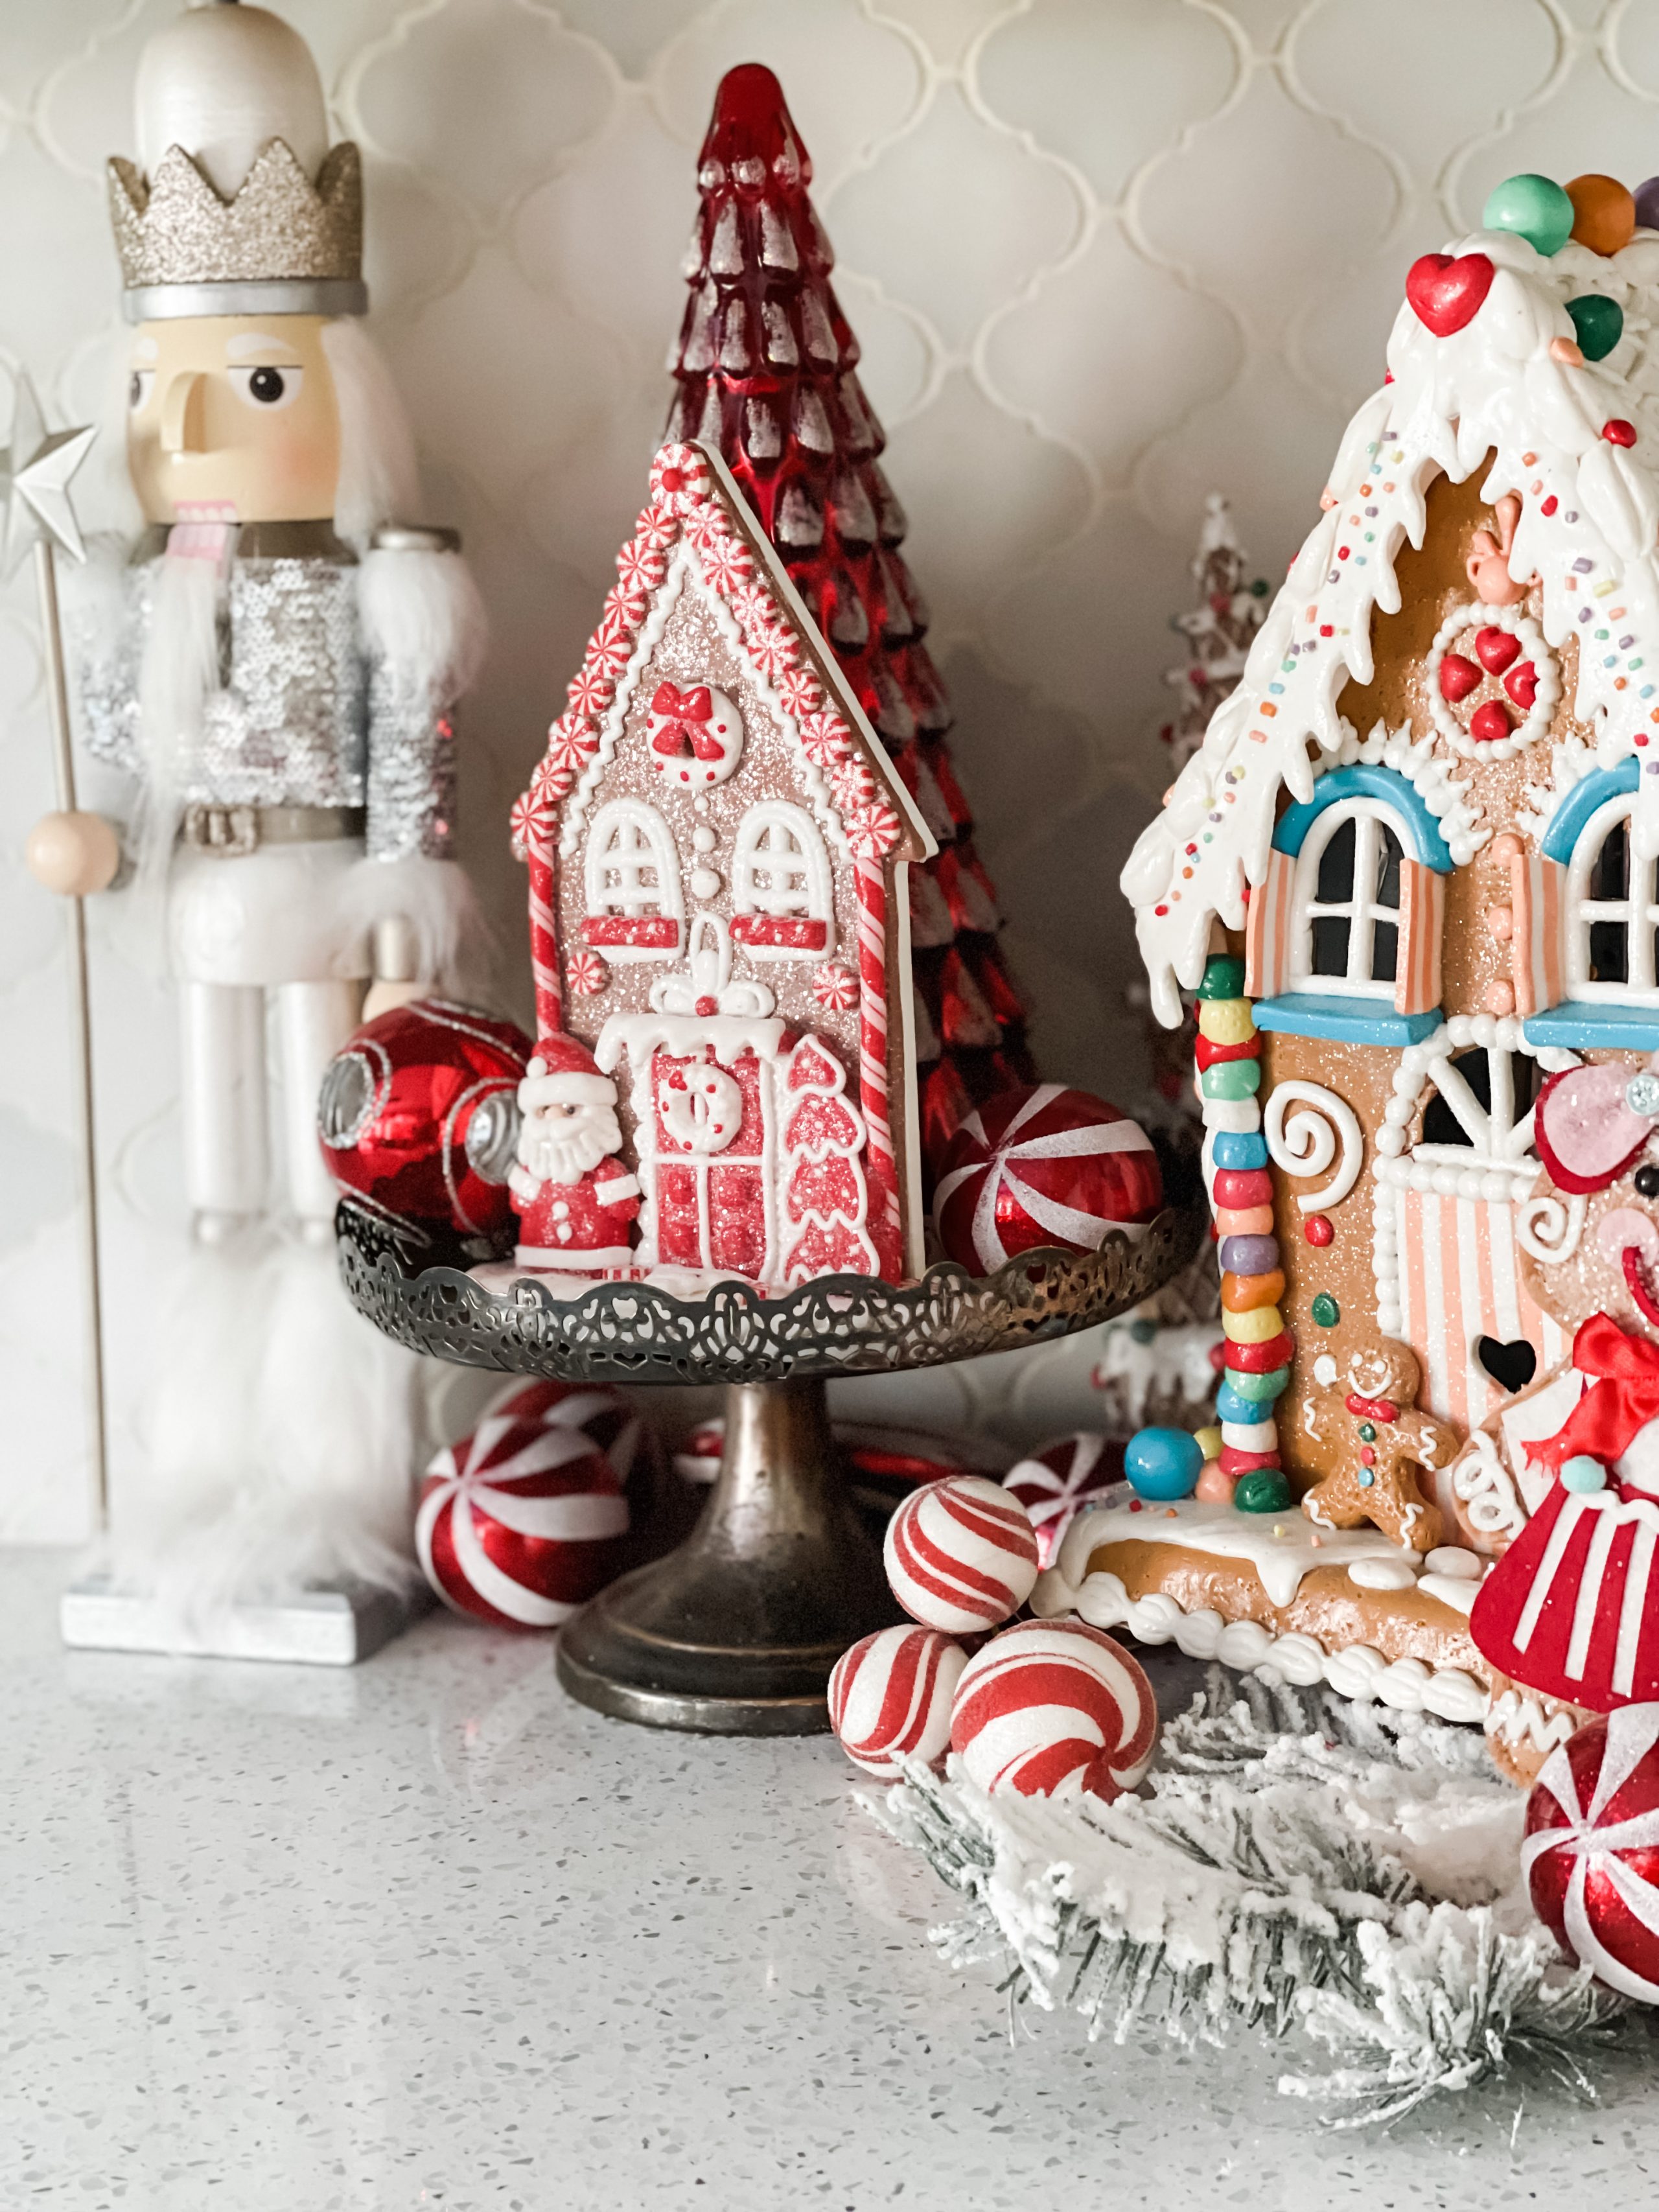 https://www.re-fabbed.com/wp-content/uploads/2021/11/christmas-kitchen-red-and-white-gingerbread10.jpg